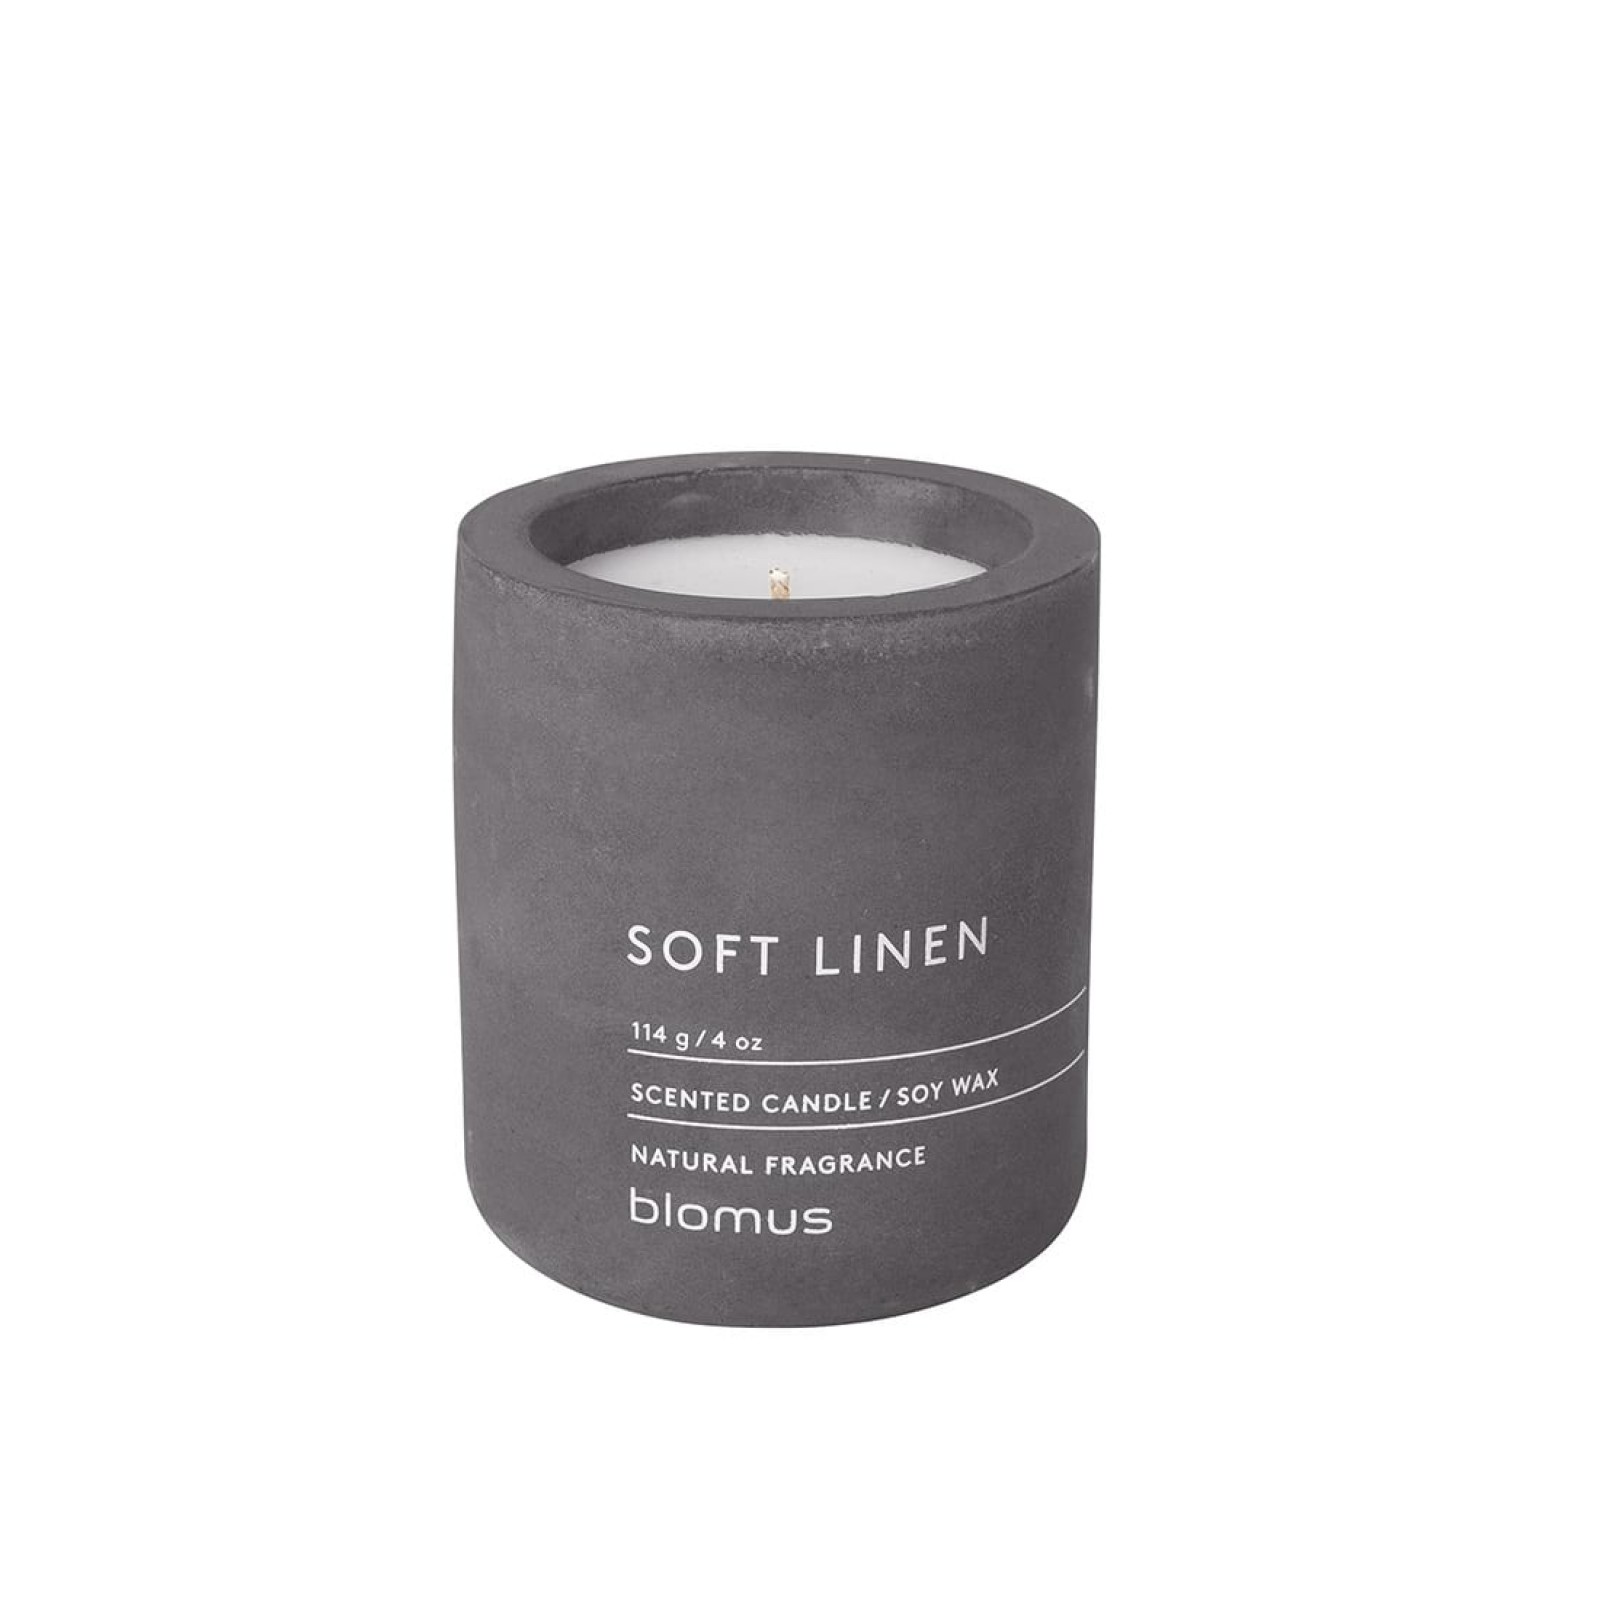 Scented Candle FRAGA S Soft Linen - Blomus